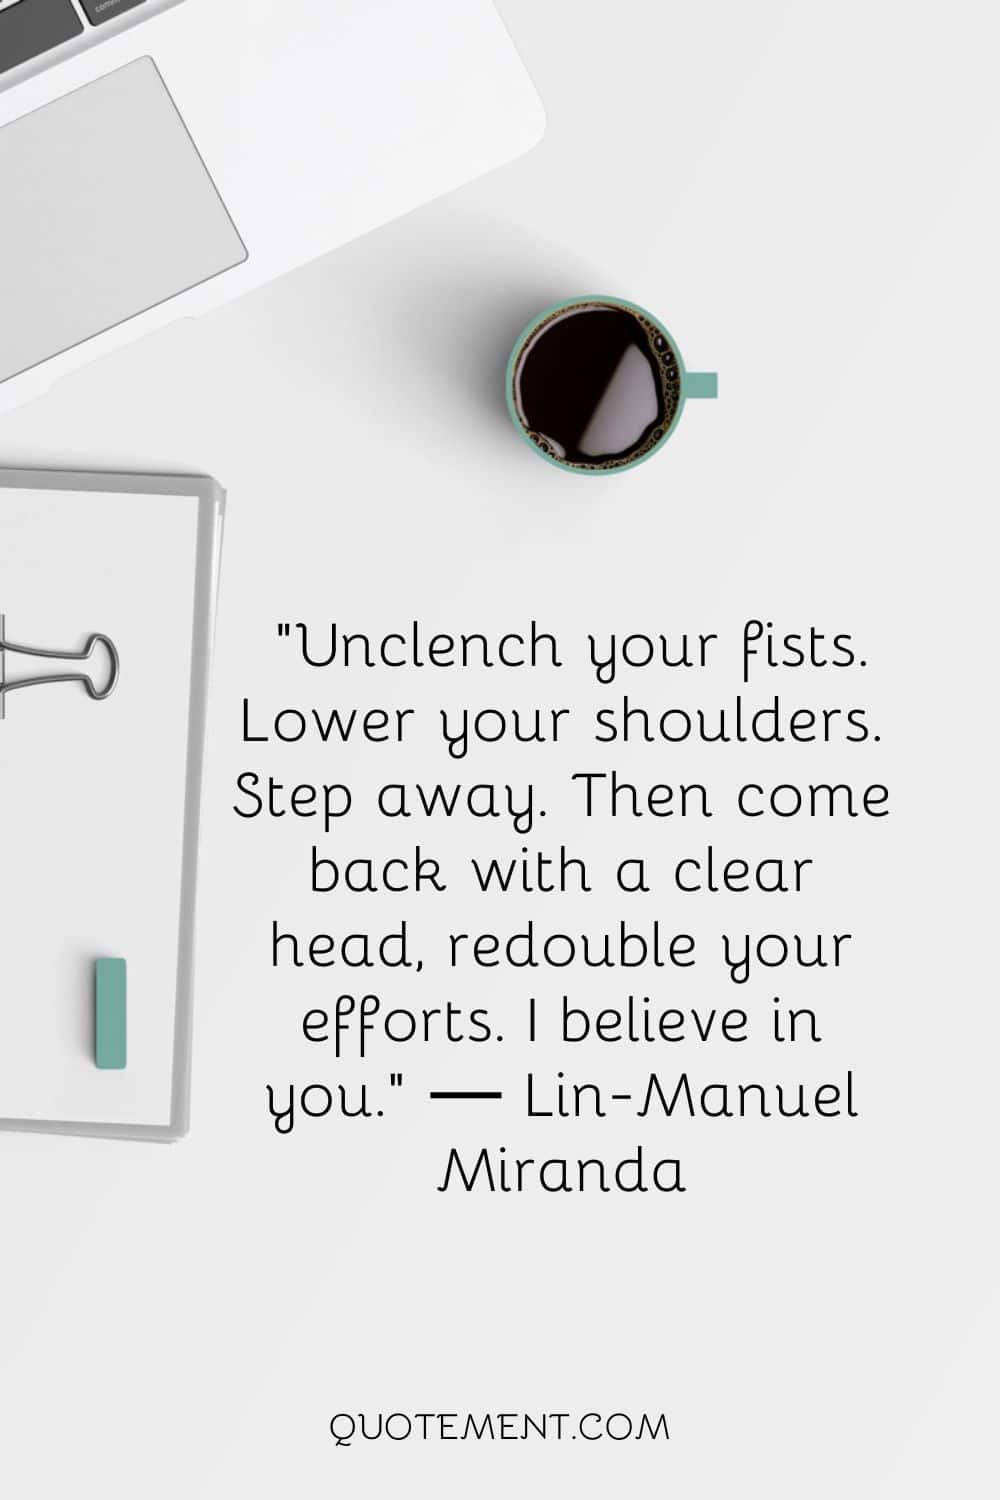 Unclench your fists. Lower your shoulders. Step away